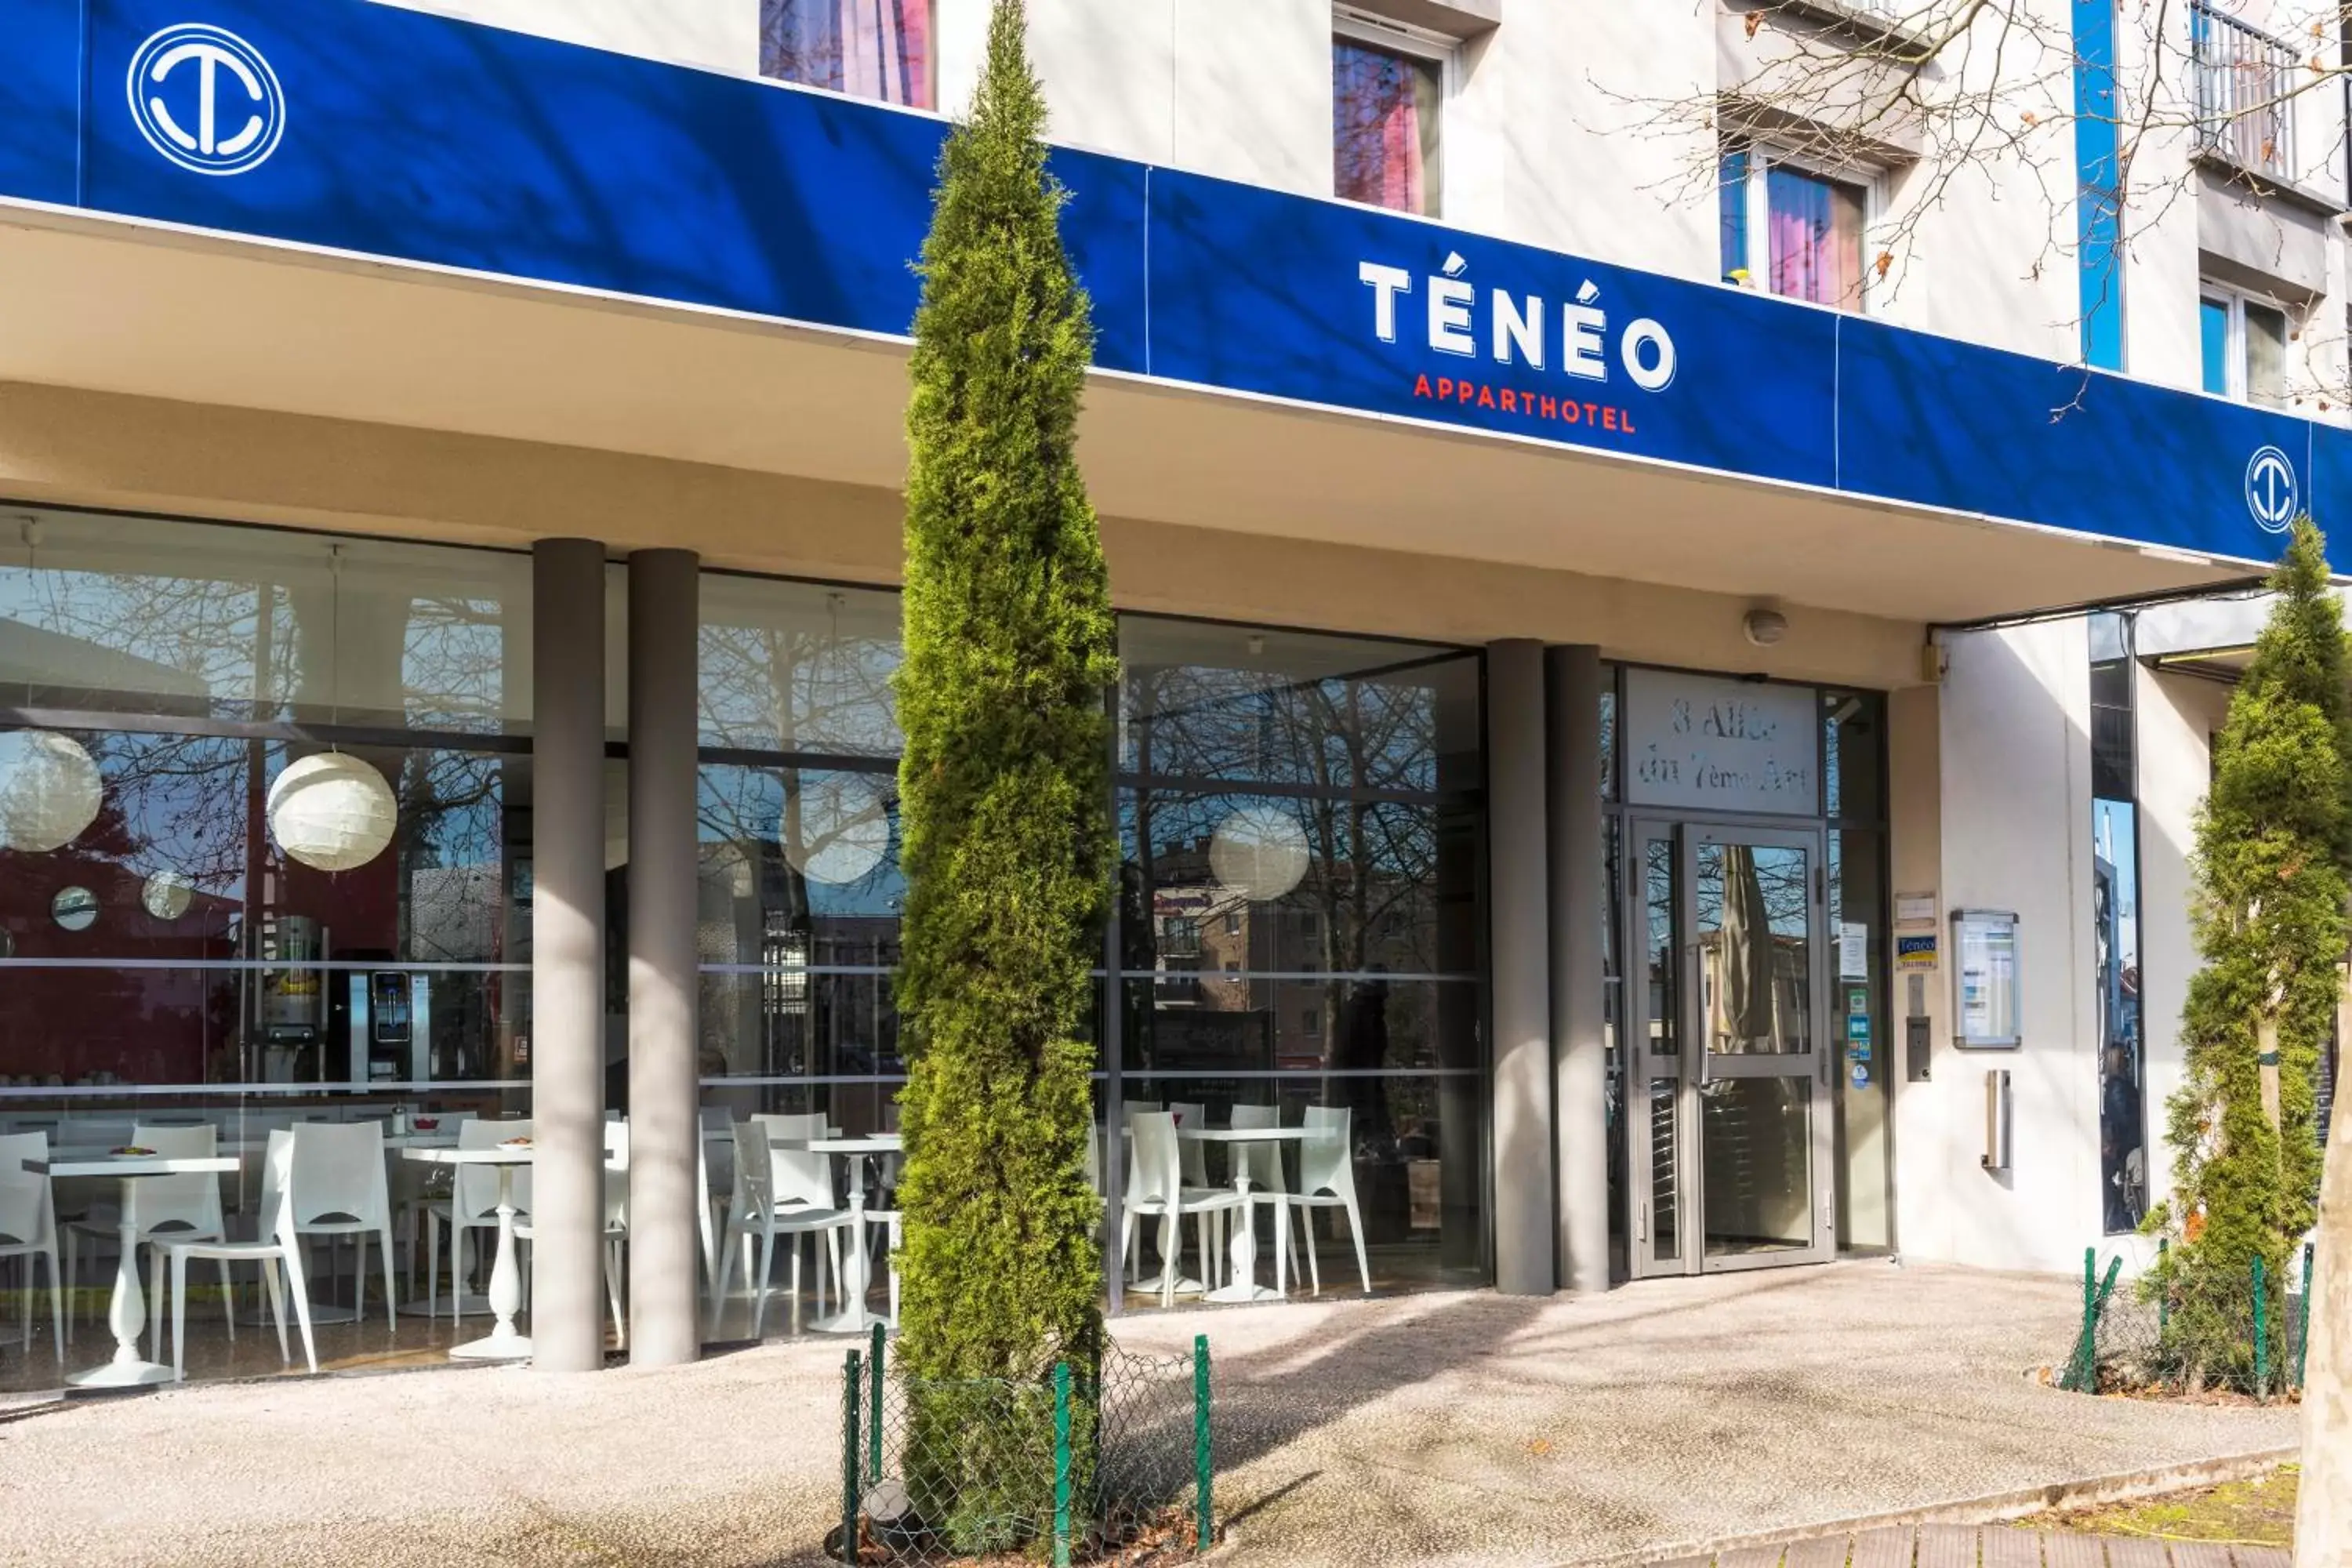 Property building in Ténéo Apparthotel Talence